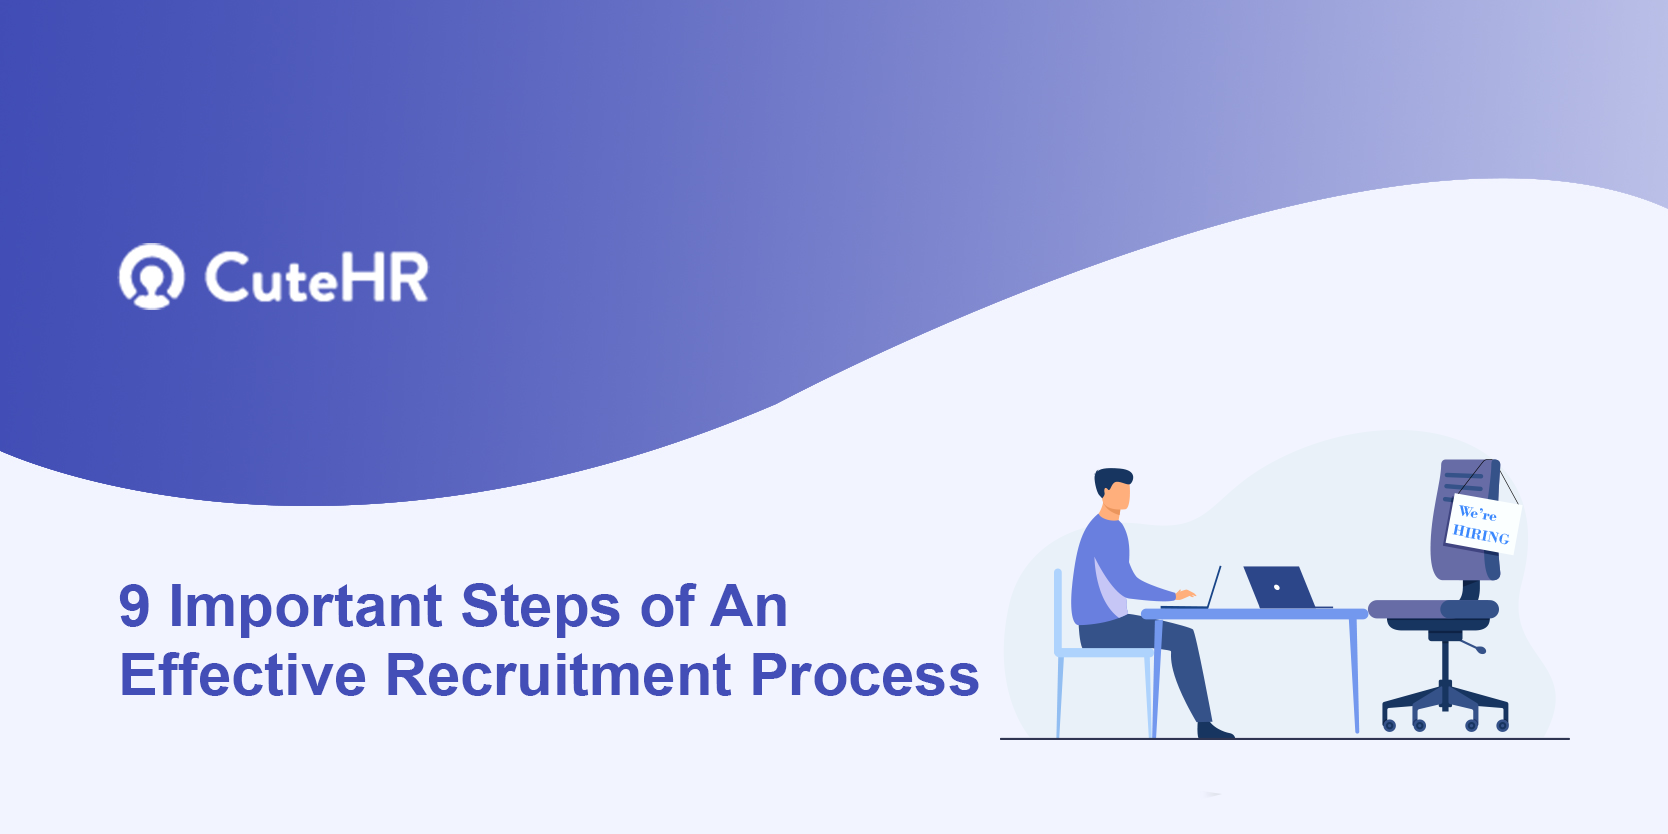 9 Important Steps of An Effective Recruitment Process